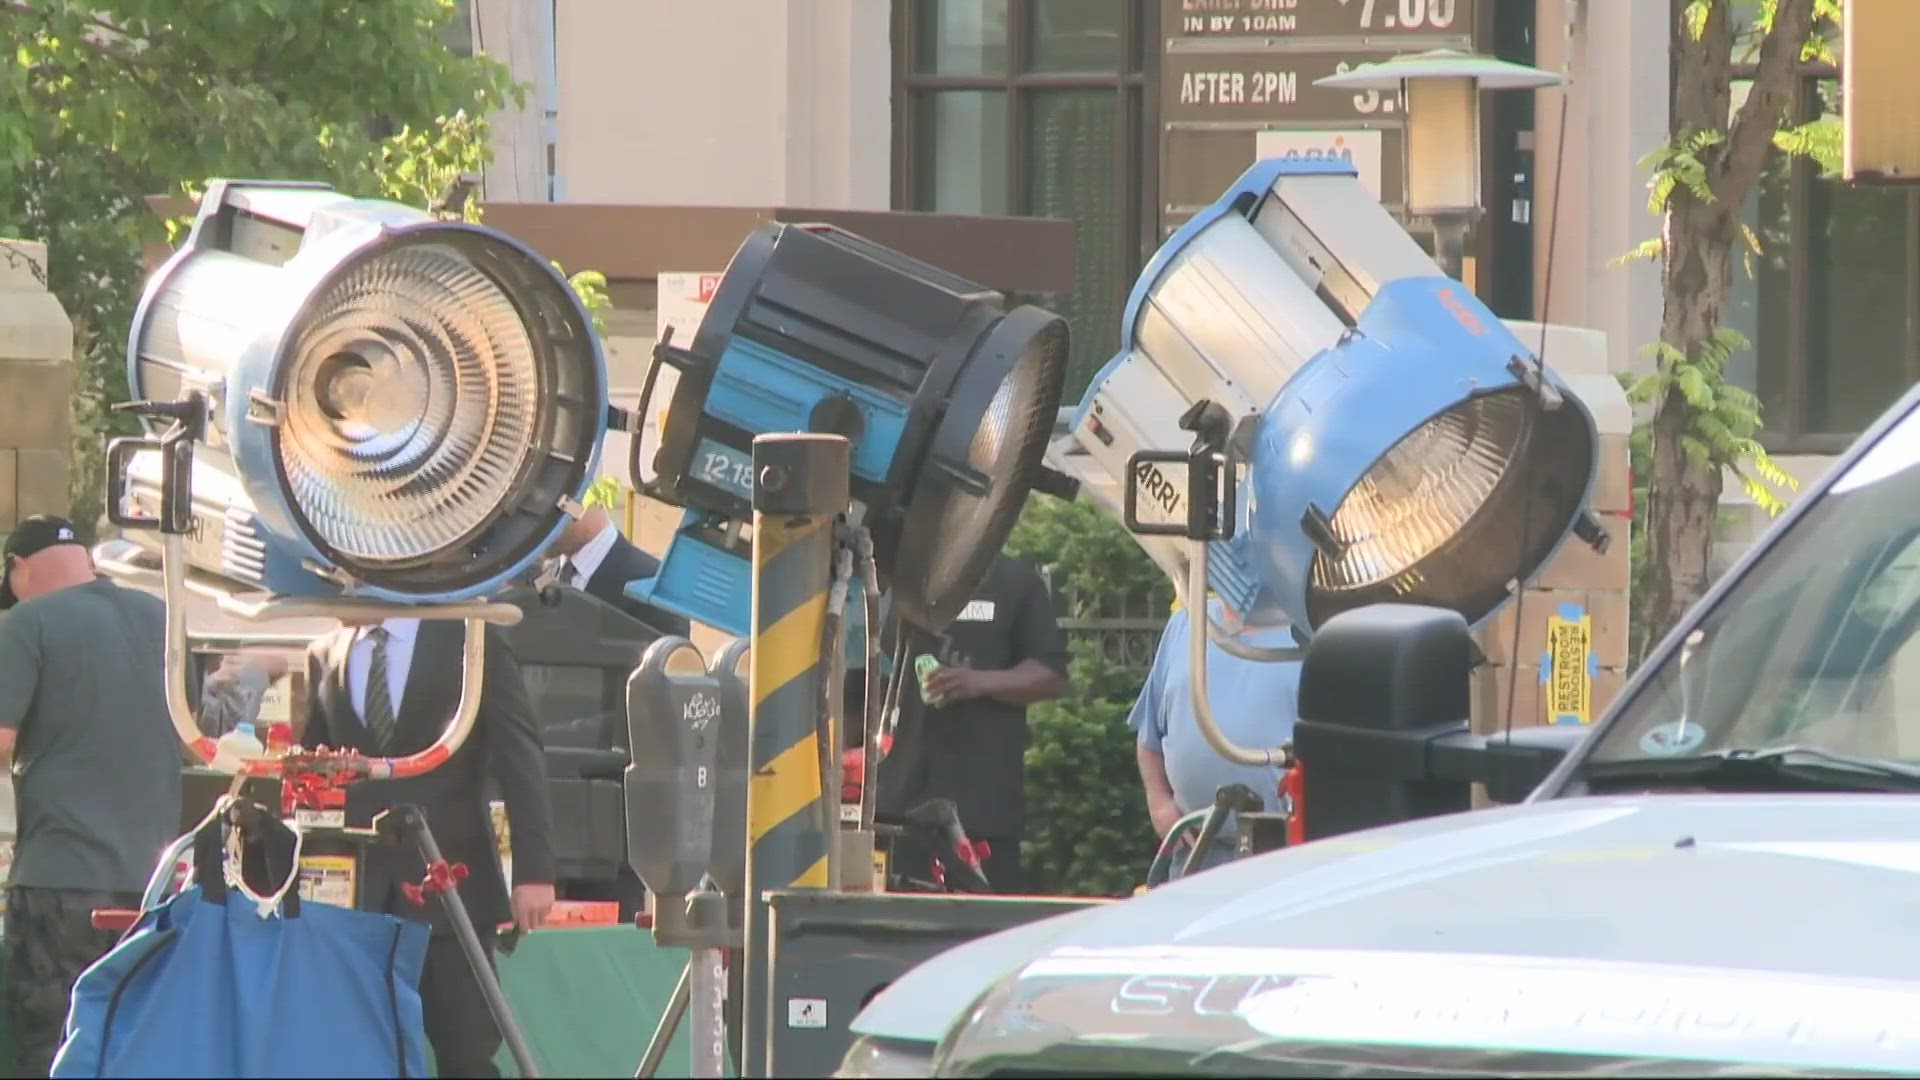 The Greater Cleveland Film Commission says tens of millions of dollars in economic development is at stake.